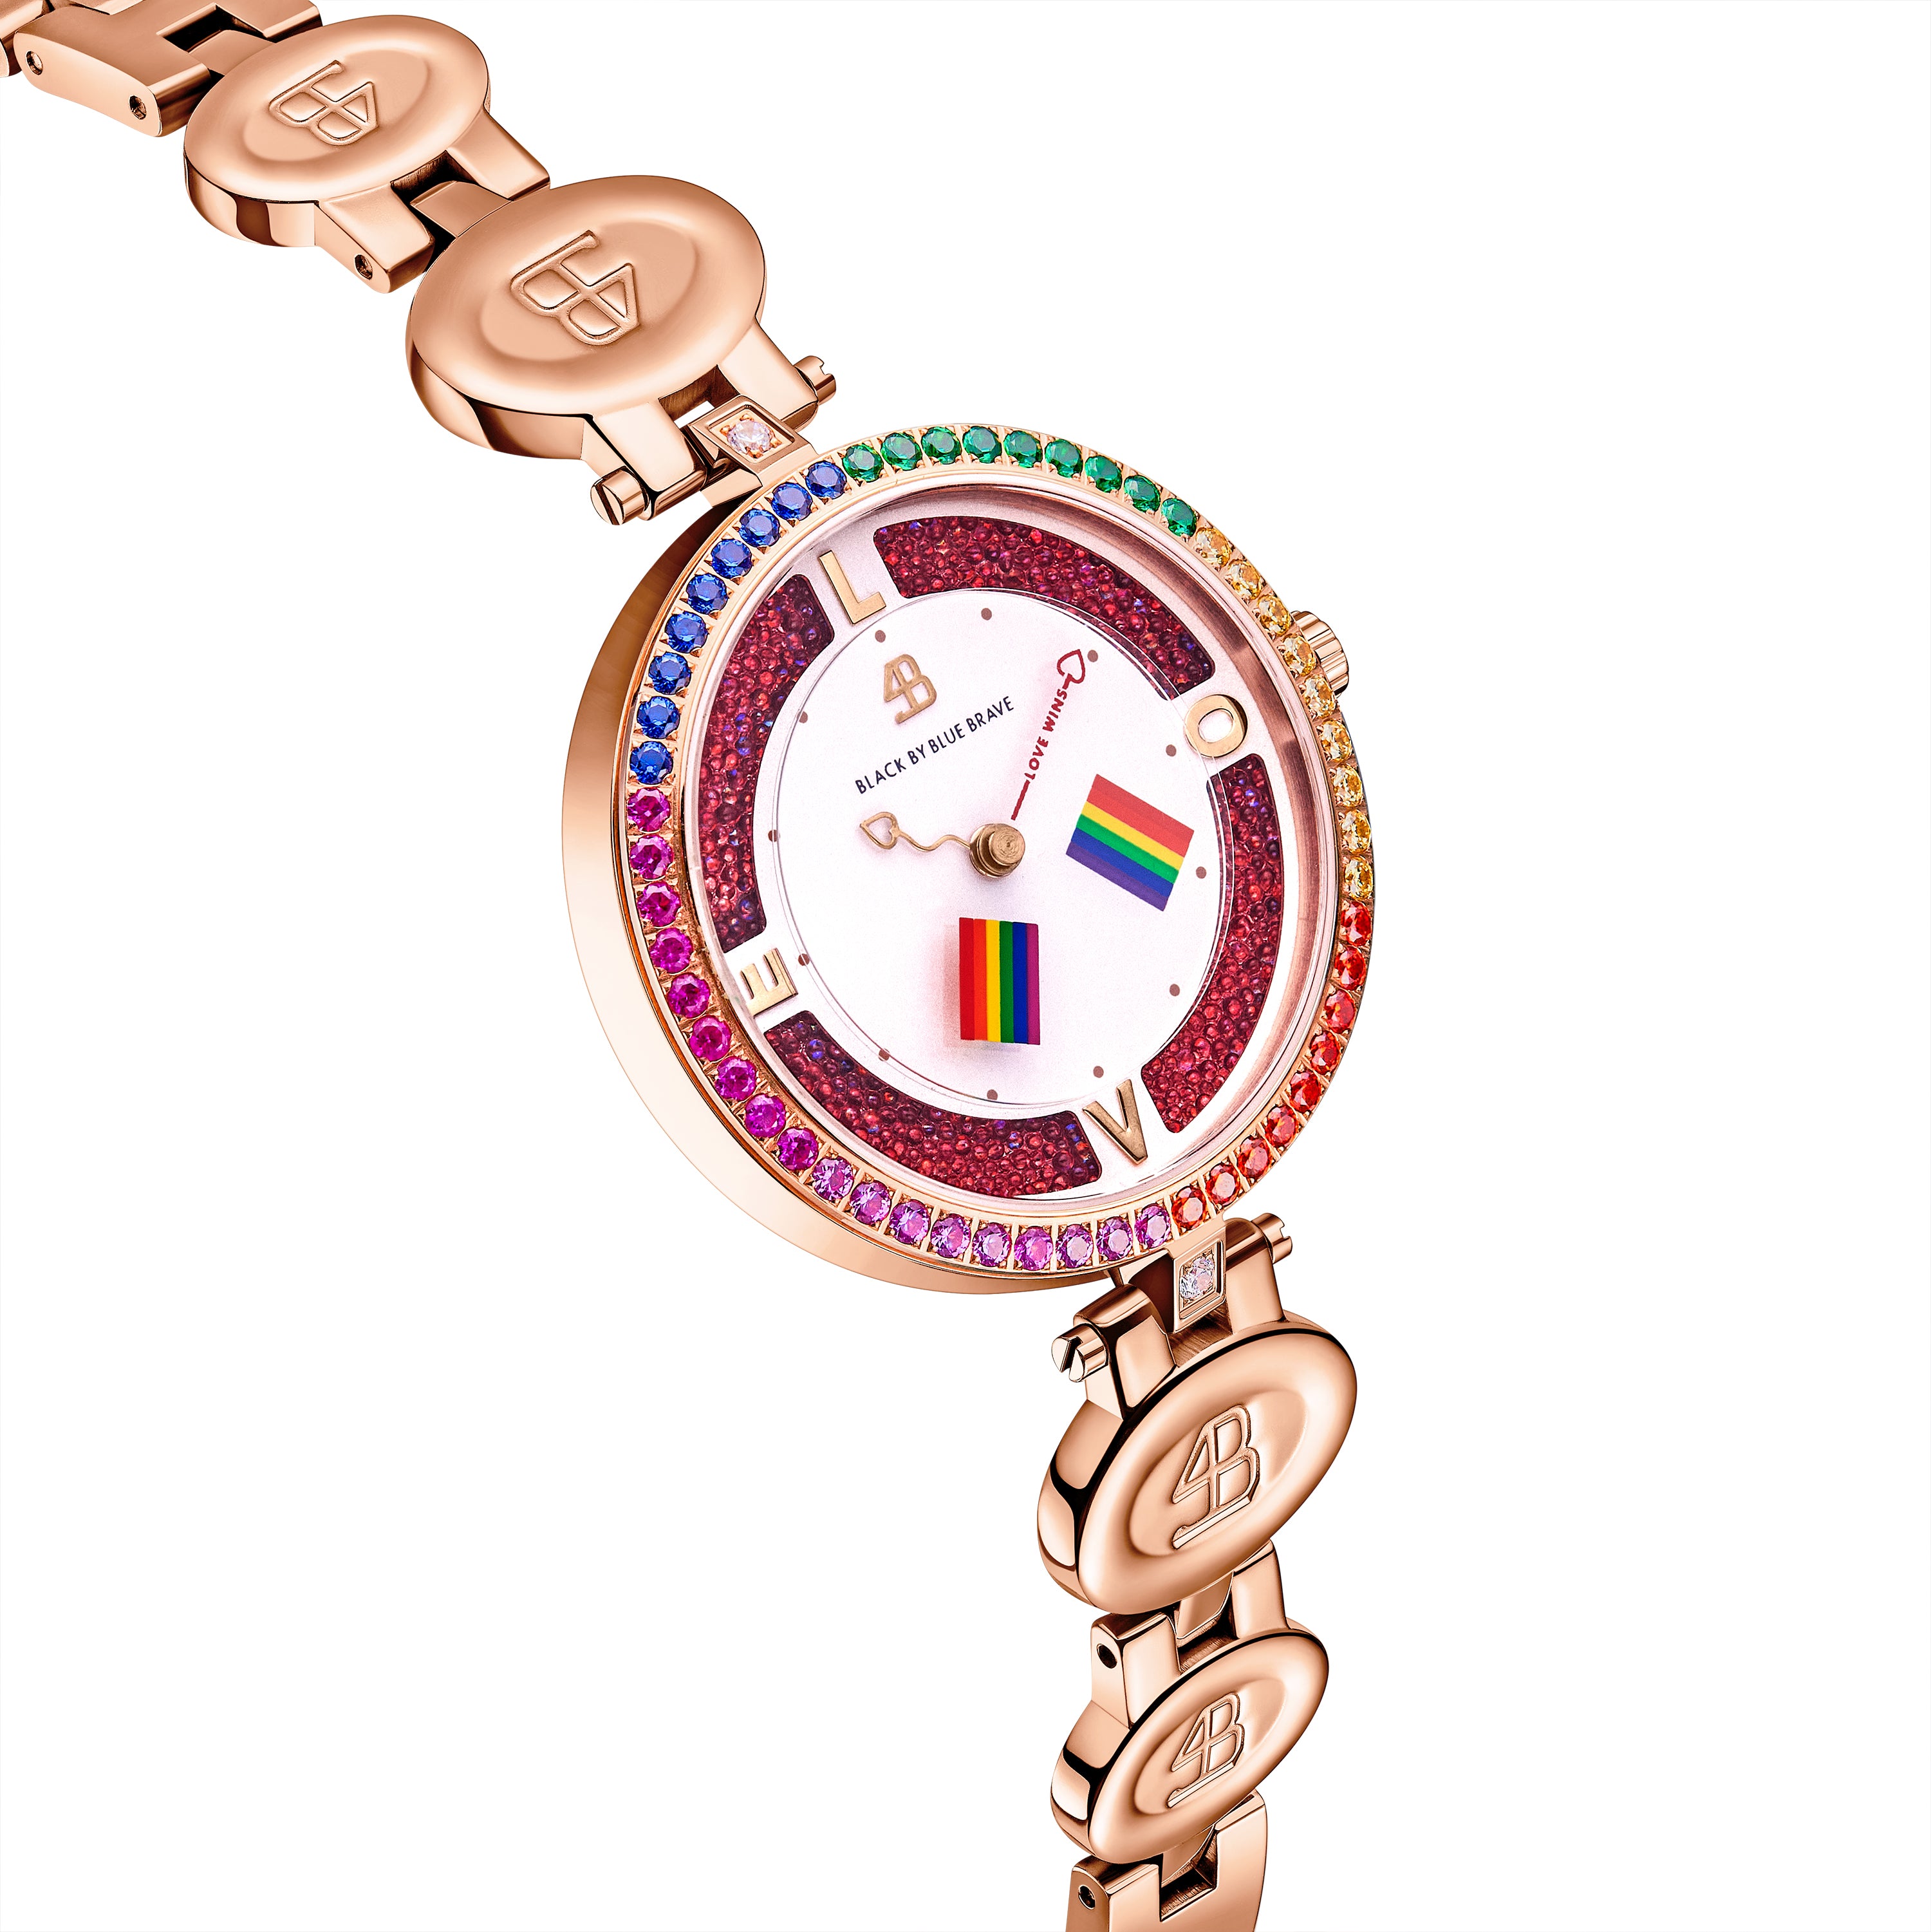 Rosegold Love Wins 2024 Watch with Rainbow Earrings